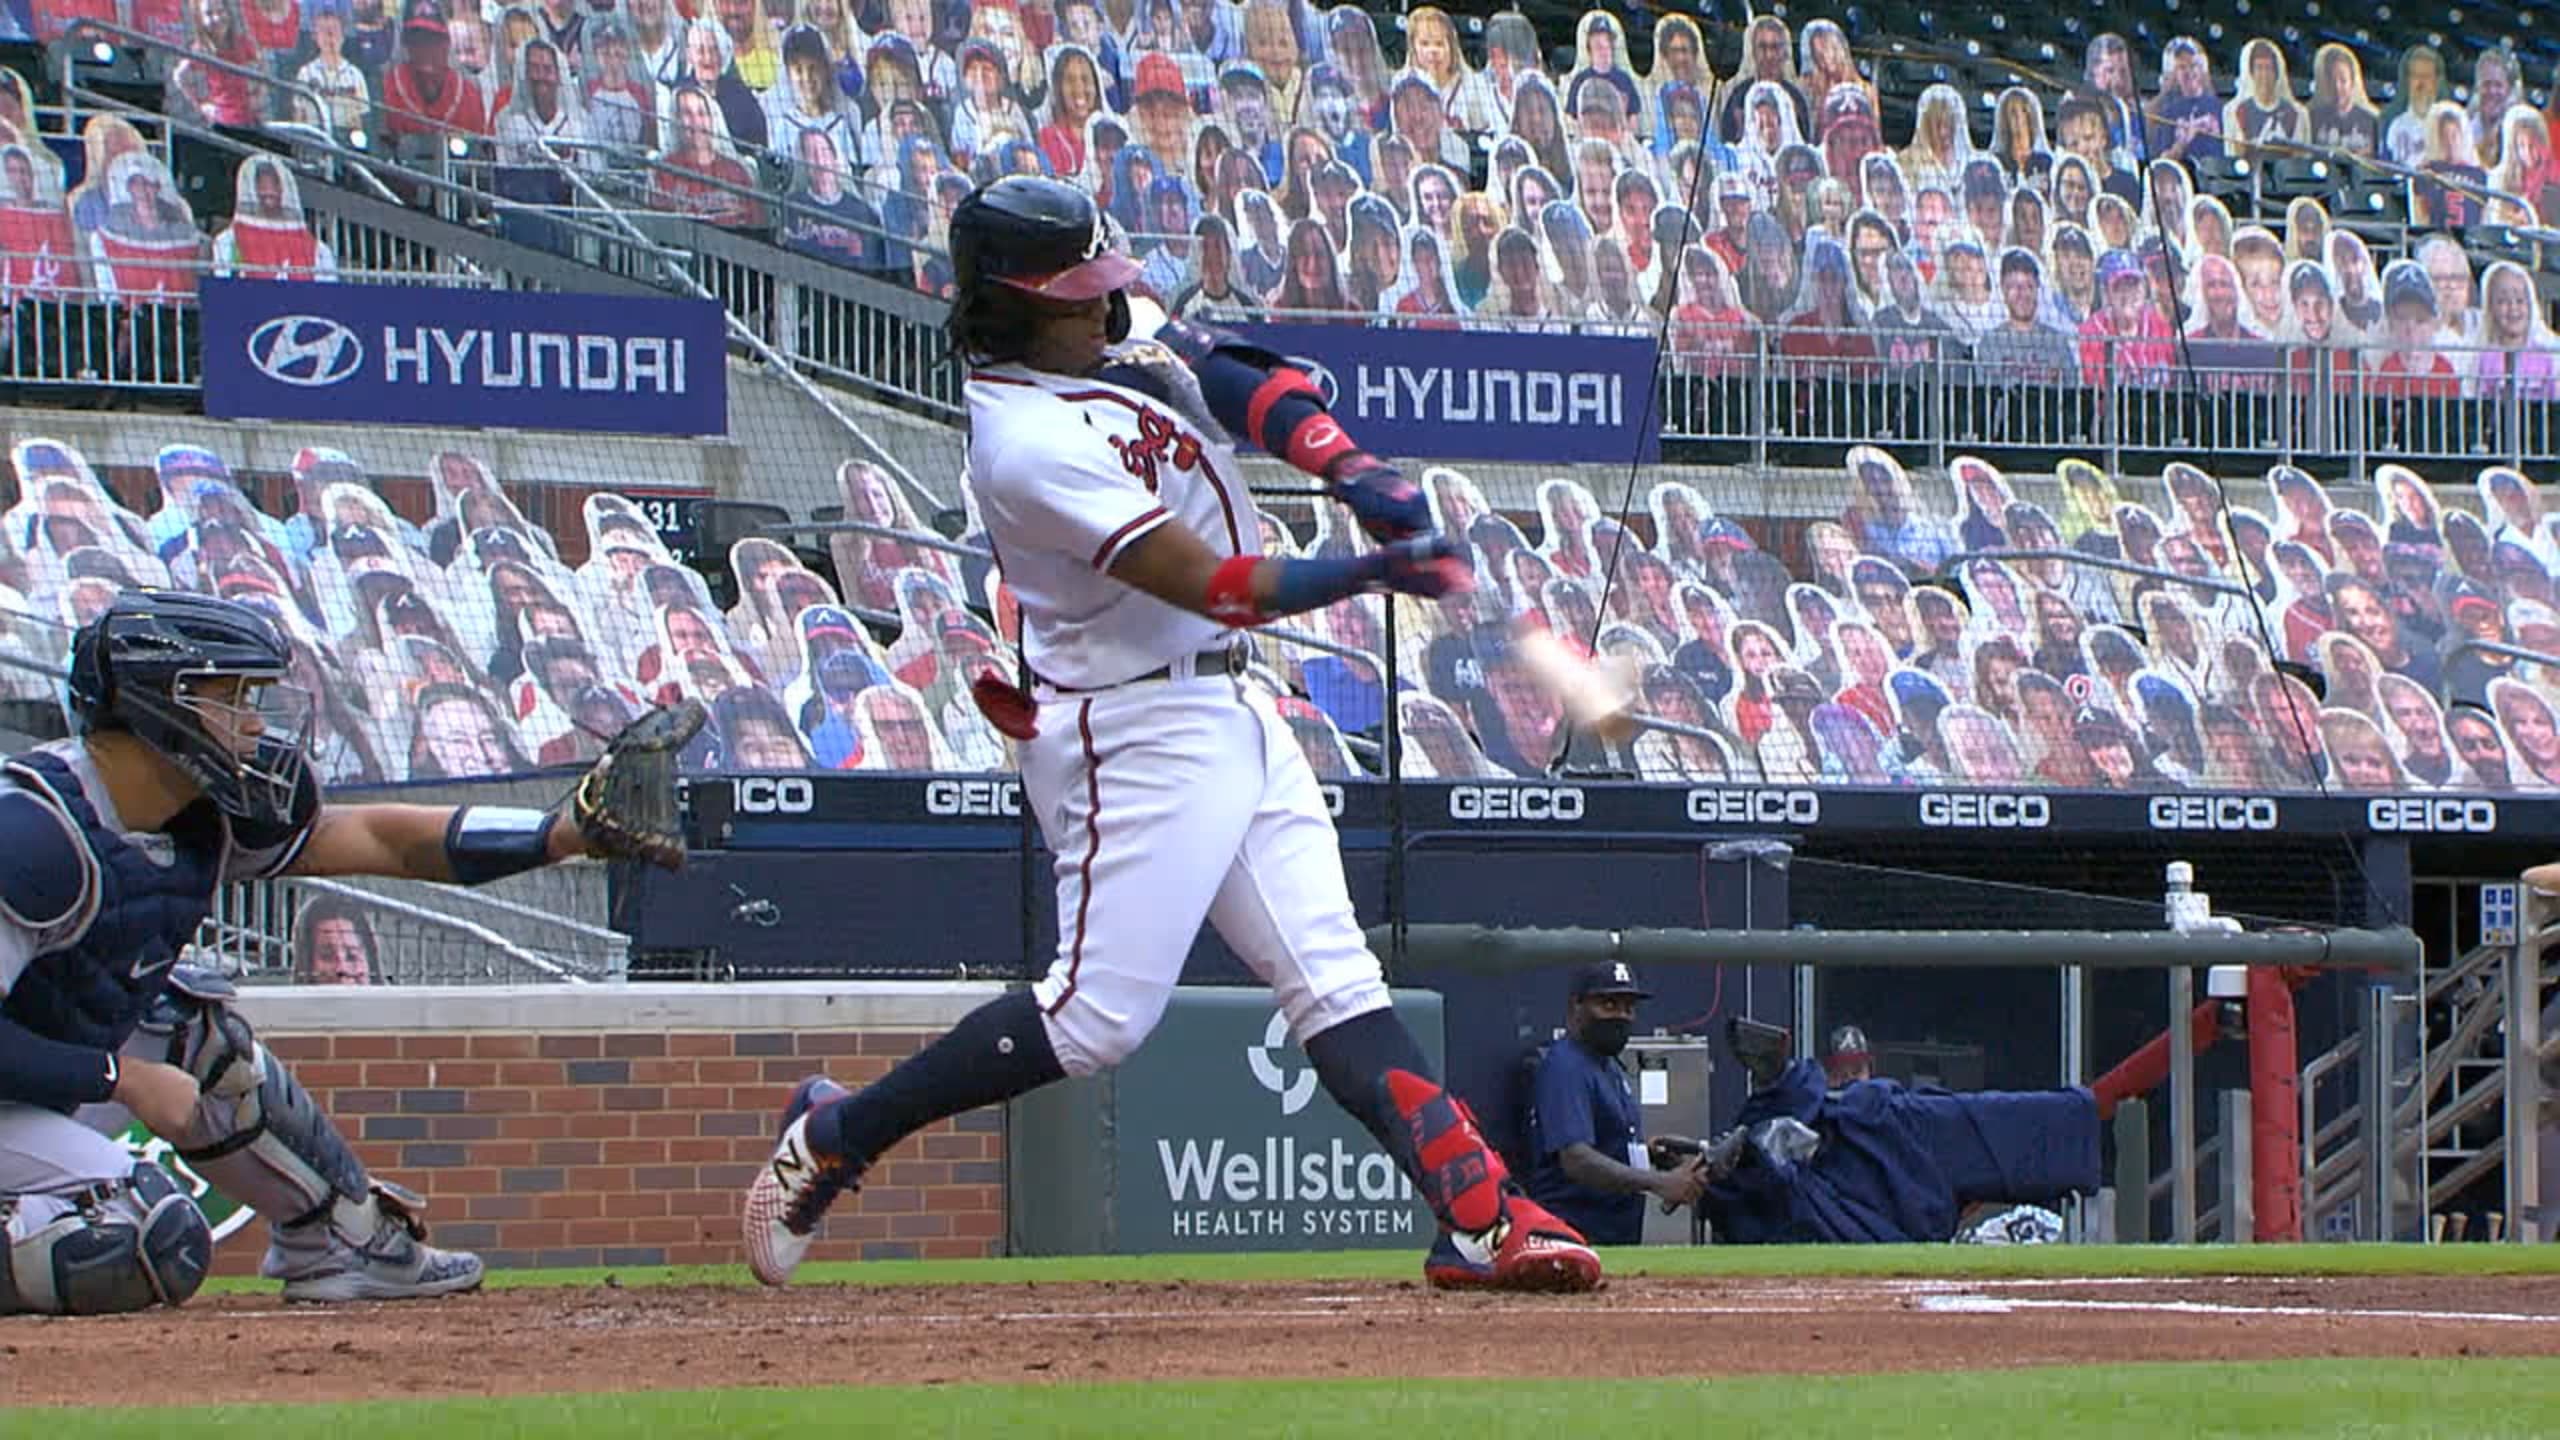 Atlanta Braves outfielder Ronald Acuna, Jr. placed on 10-day IL